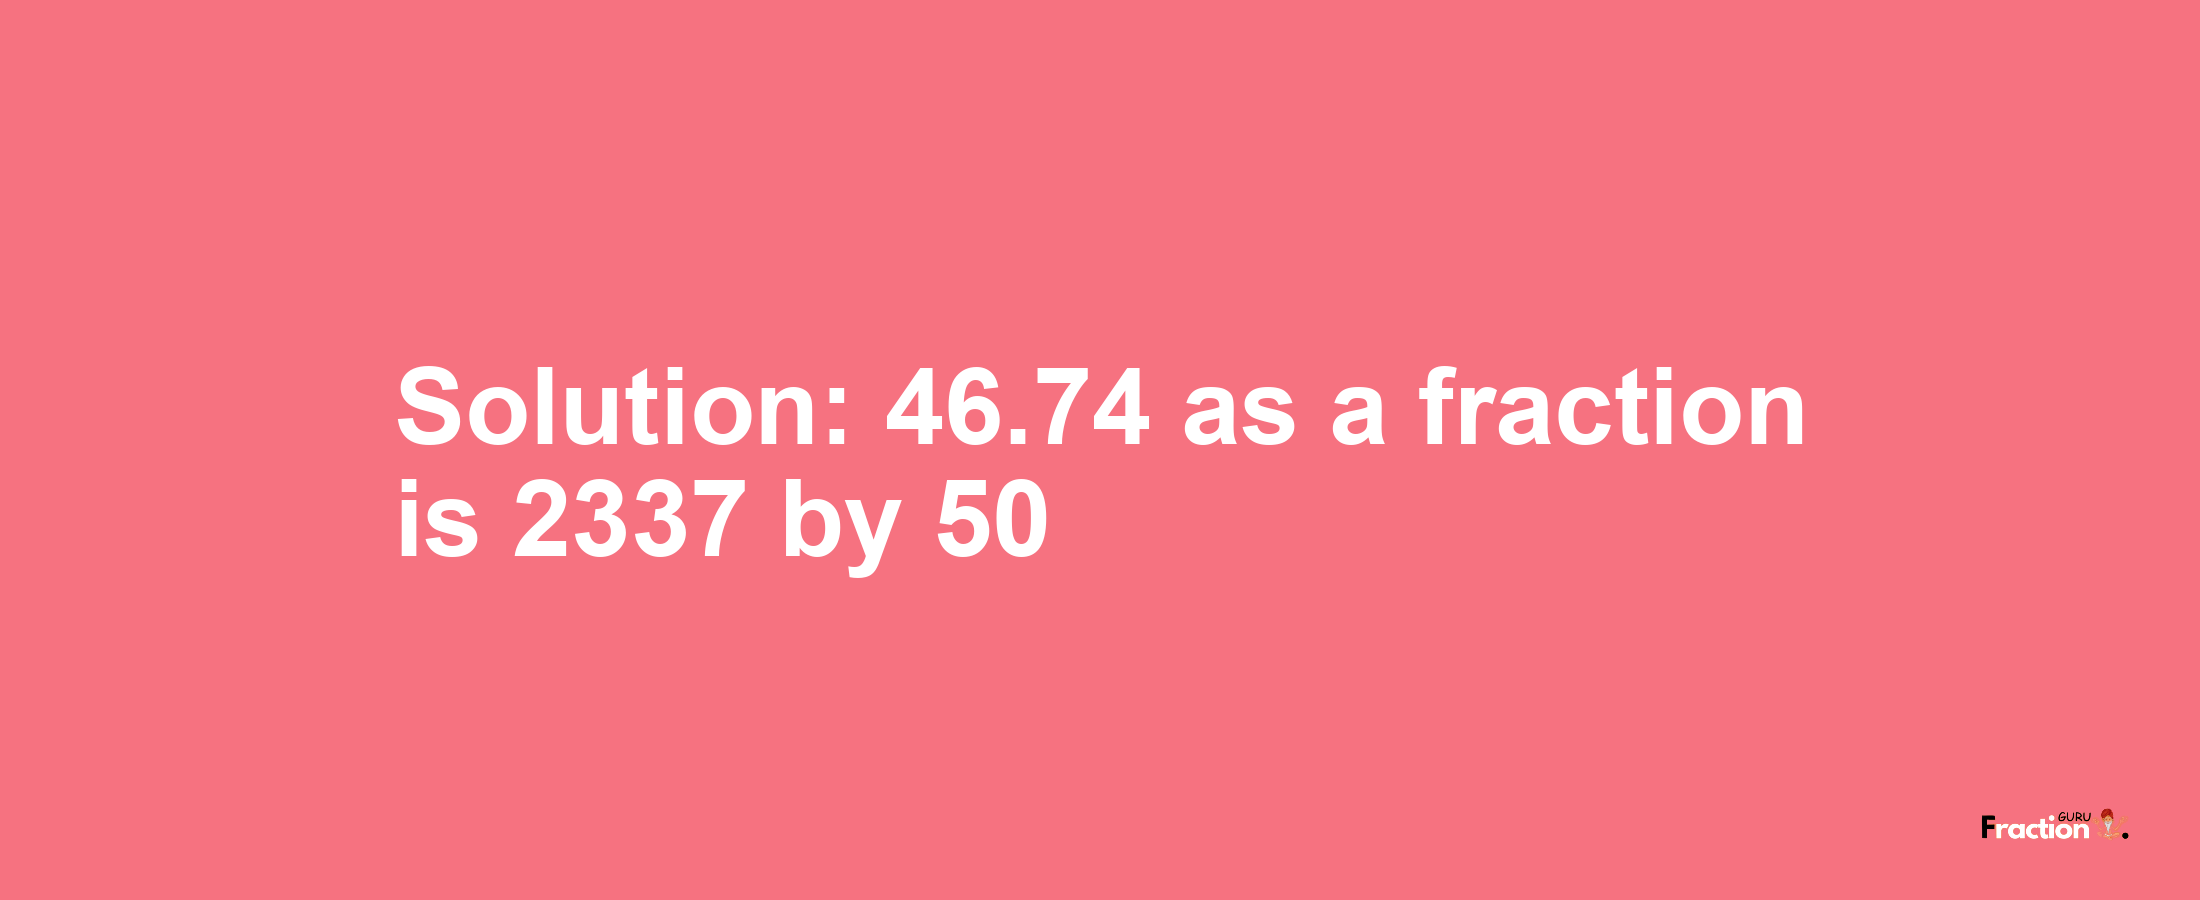 Solution:46.74 as a fraction is 2337/50